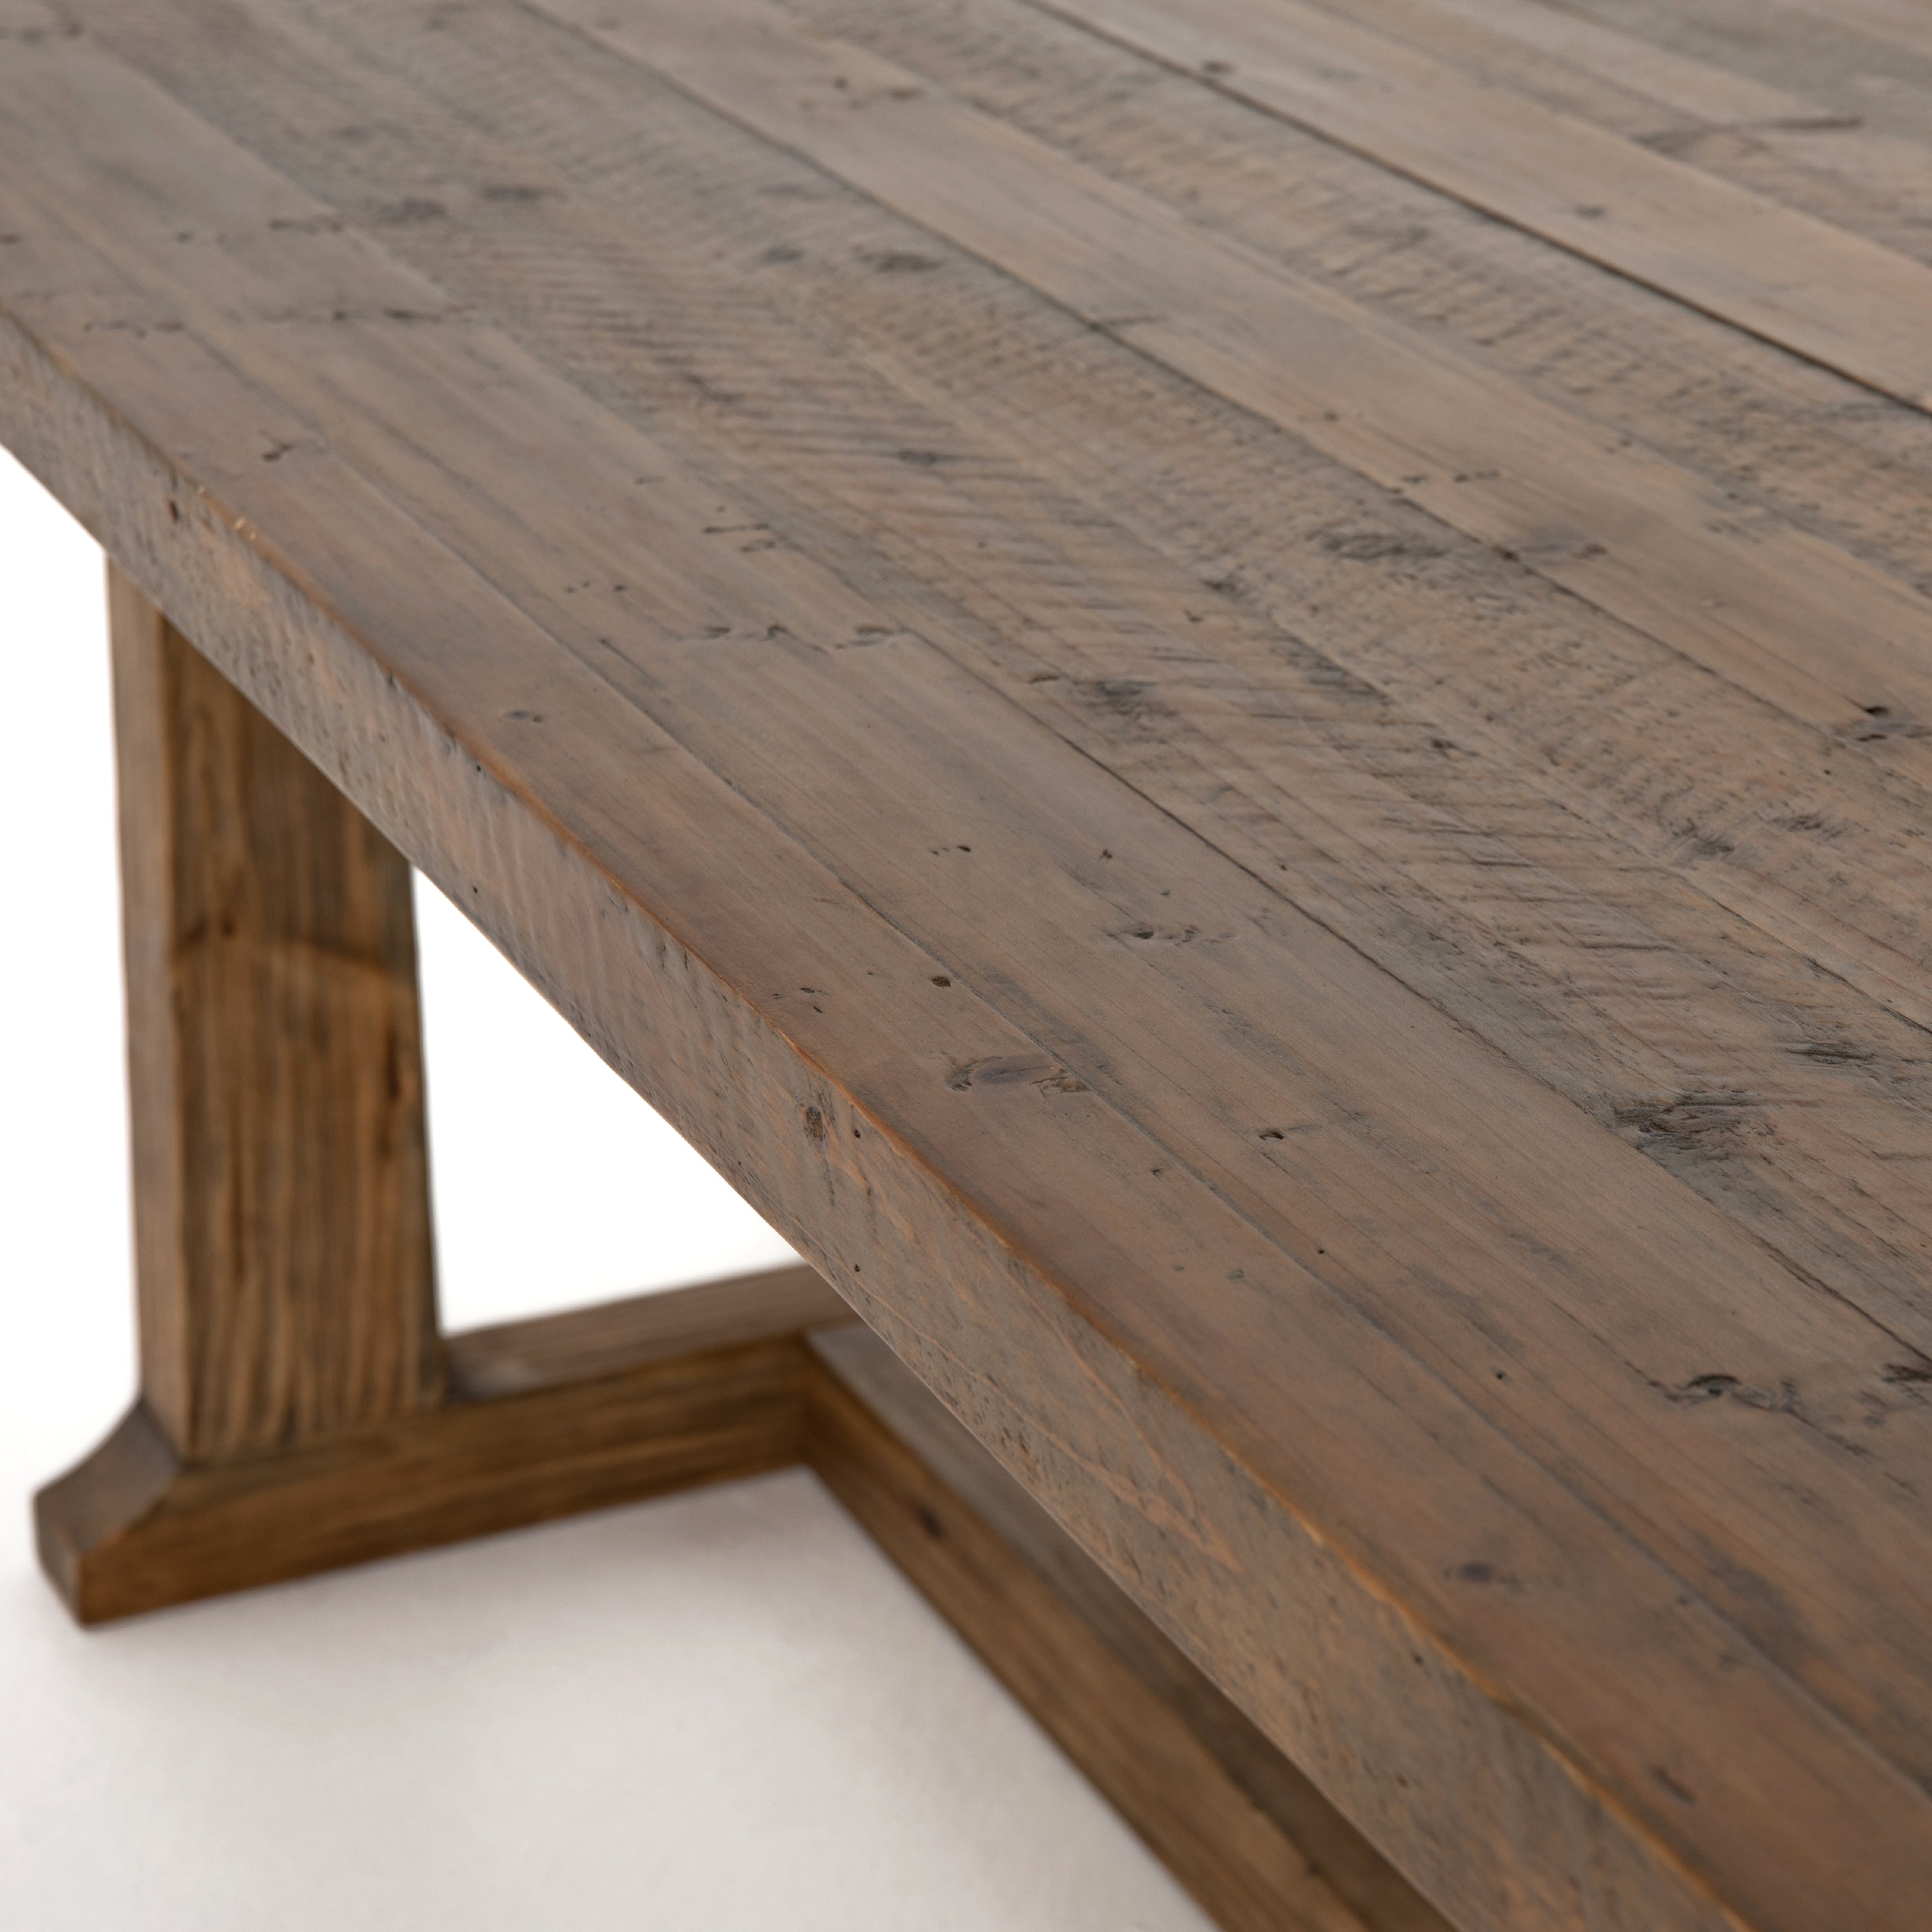 Bring a traditional sense to the table with this Otto Dining Table - 110". Finished in a warm honey hue, a trestle-style base of reclaimed pine supports a rectangular top of pine, waxed and bleached for a rustic look with natural depth.